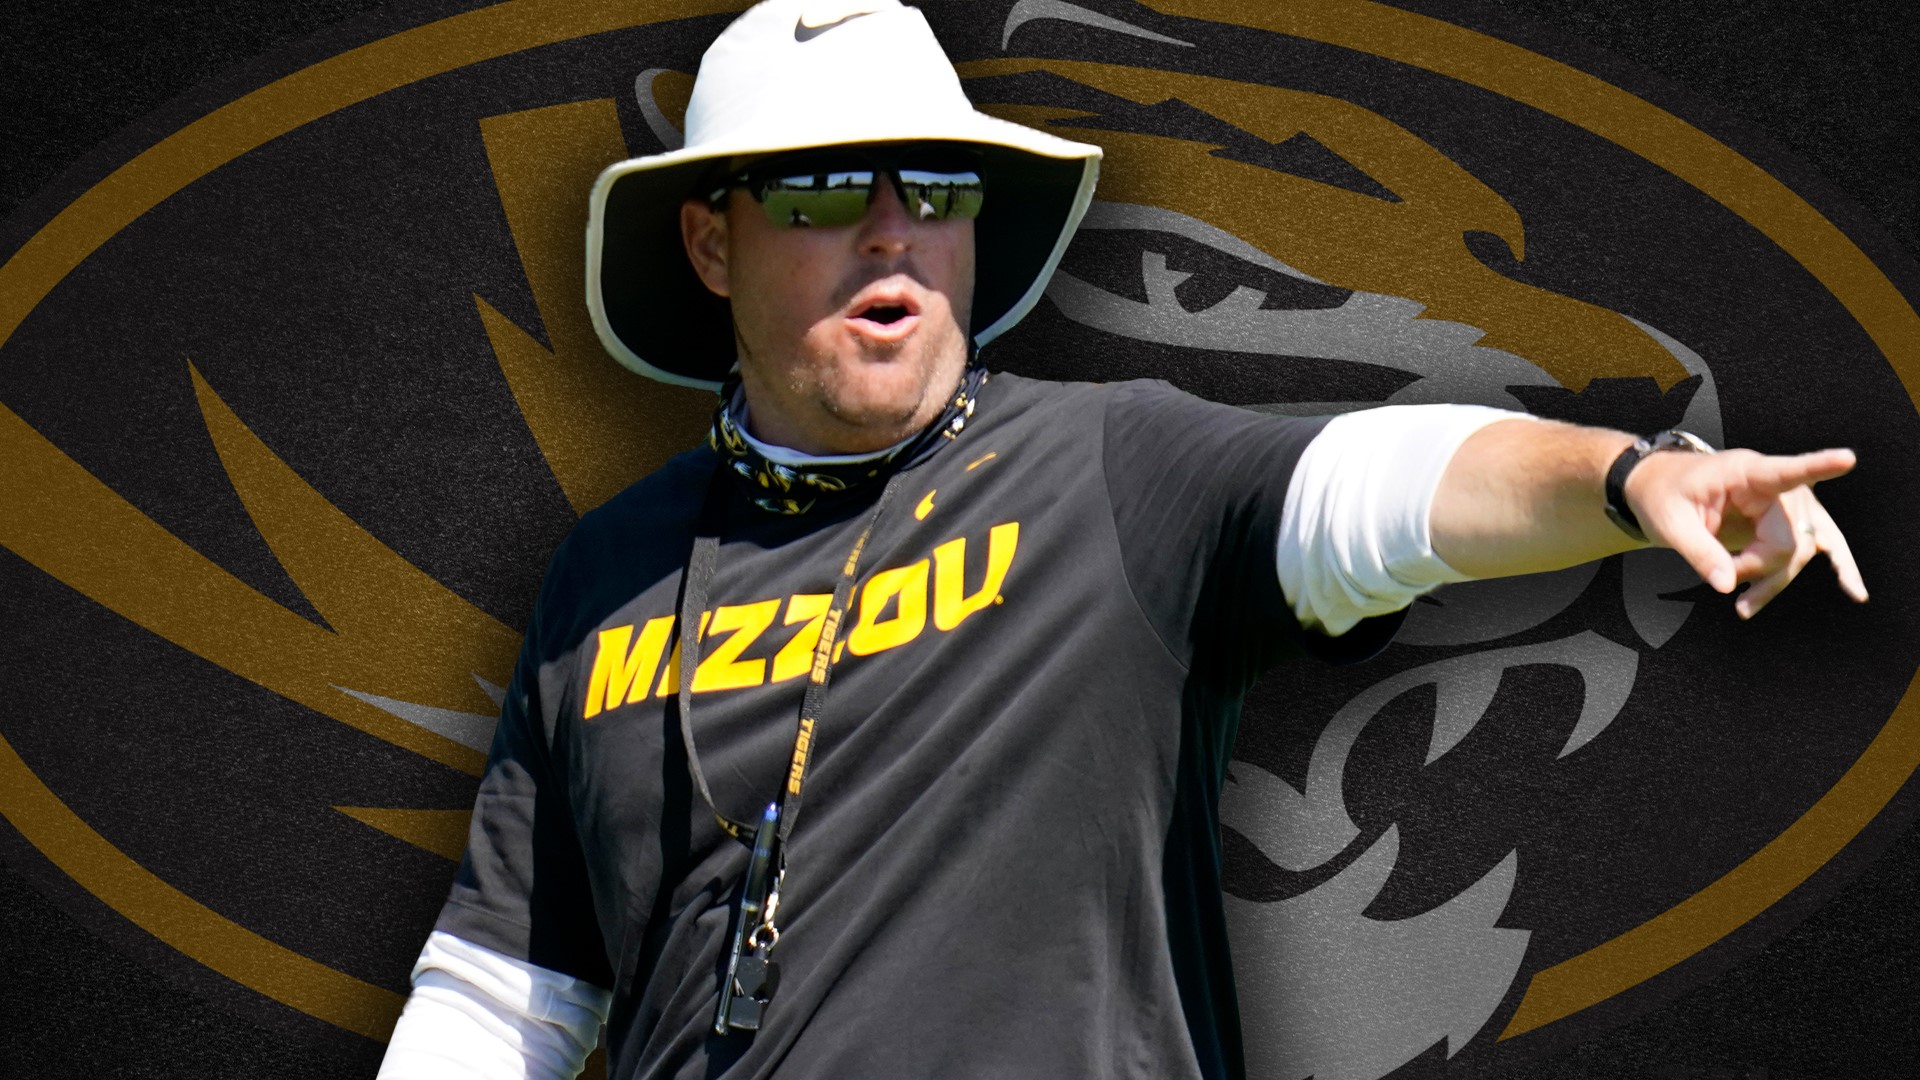 Drinkwitz is tearing up the recruiting trail for the Tigers